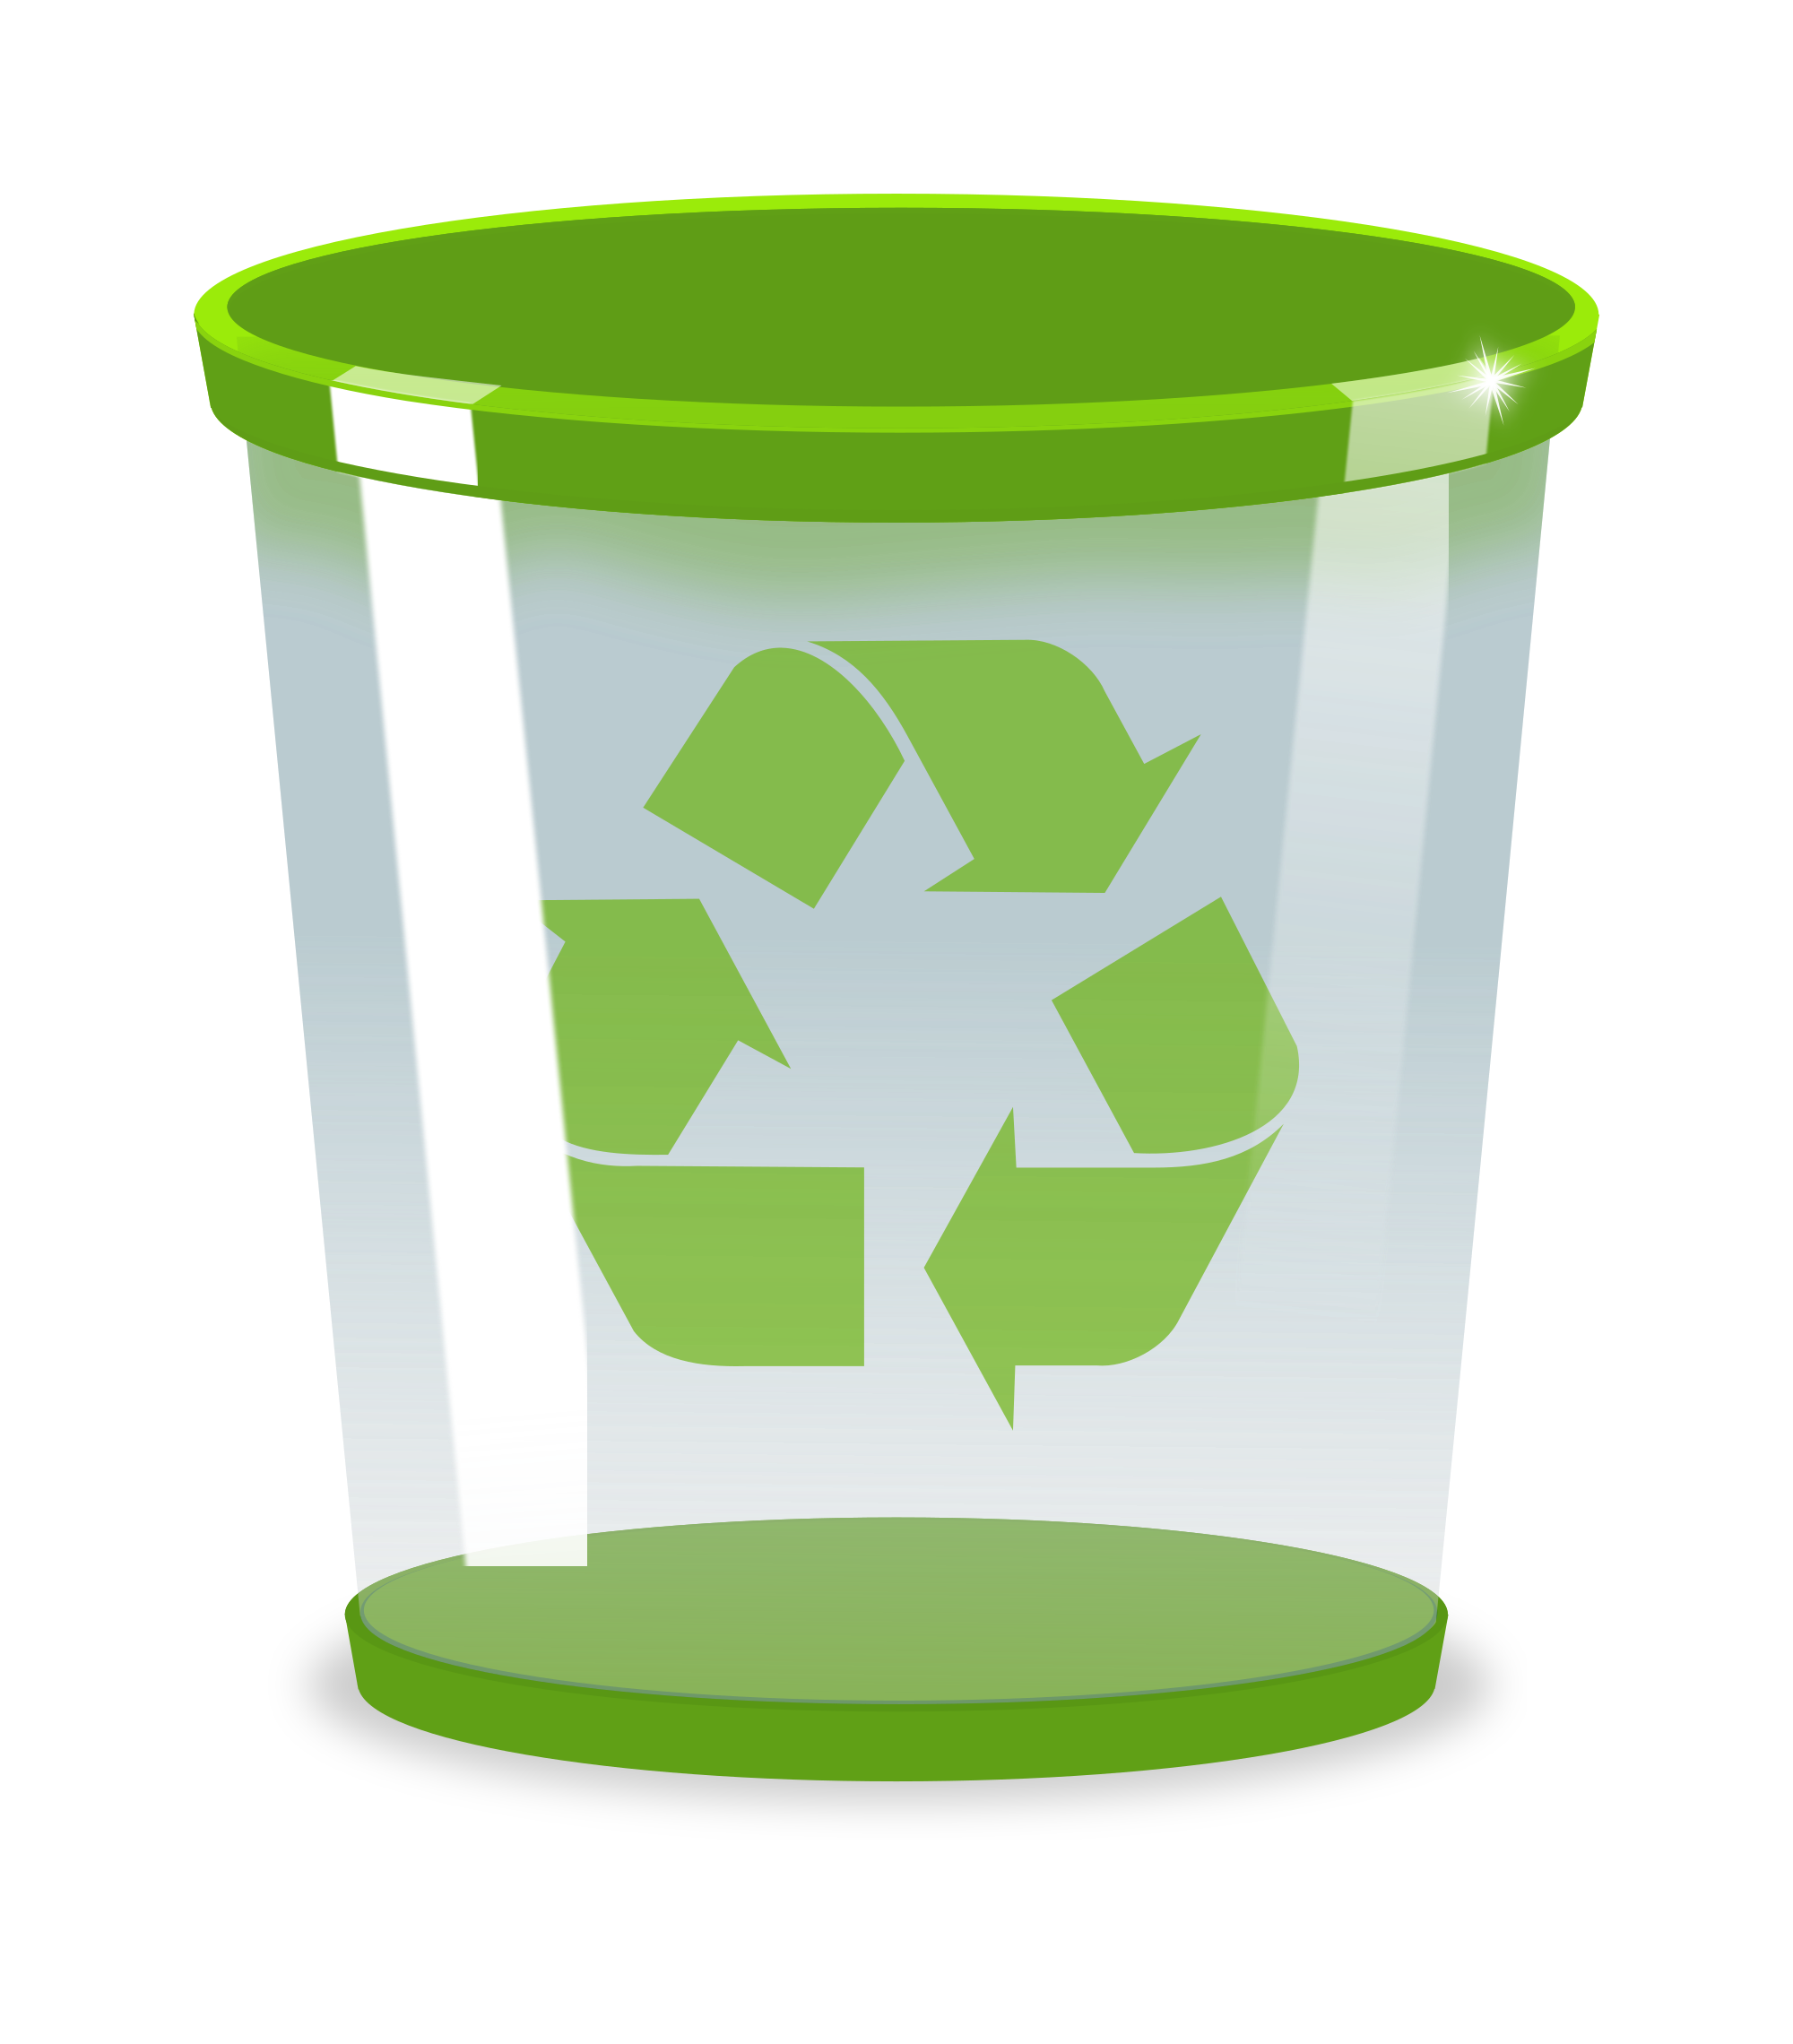 Green Clipart Recycle Bin Green Recycle Bin Transparent Free For